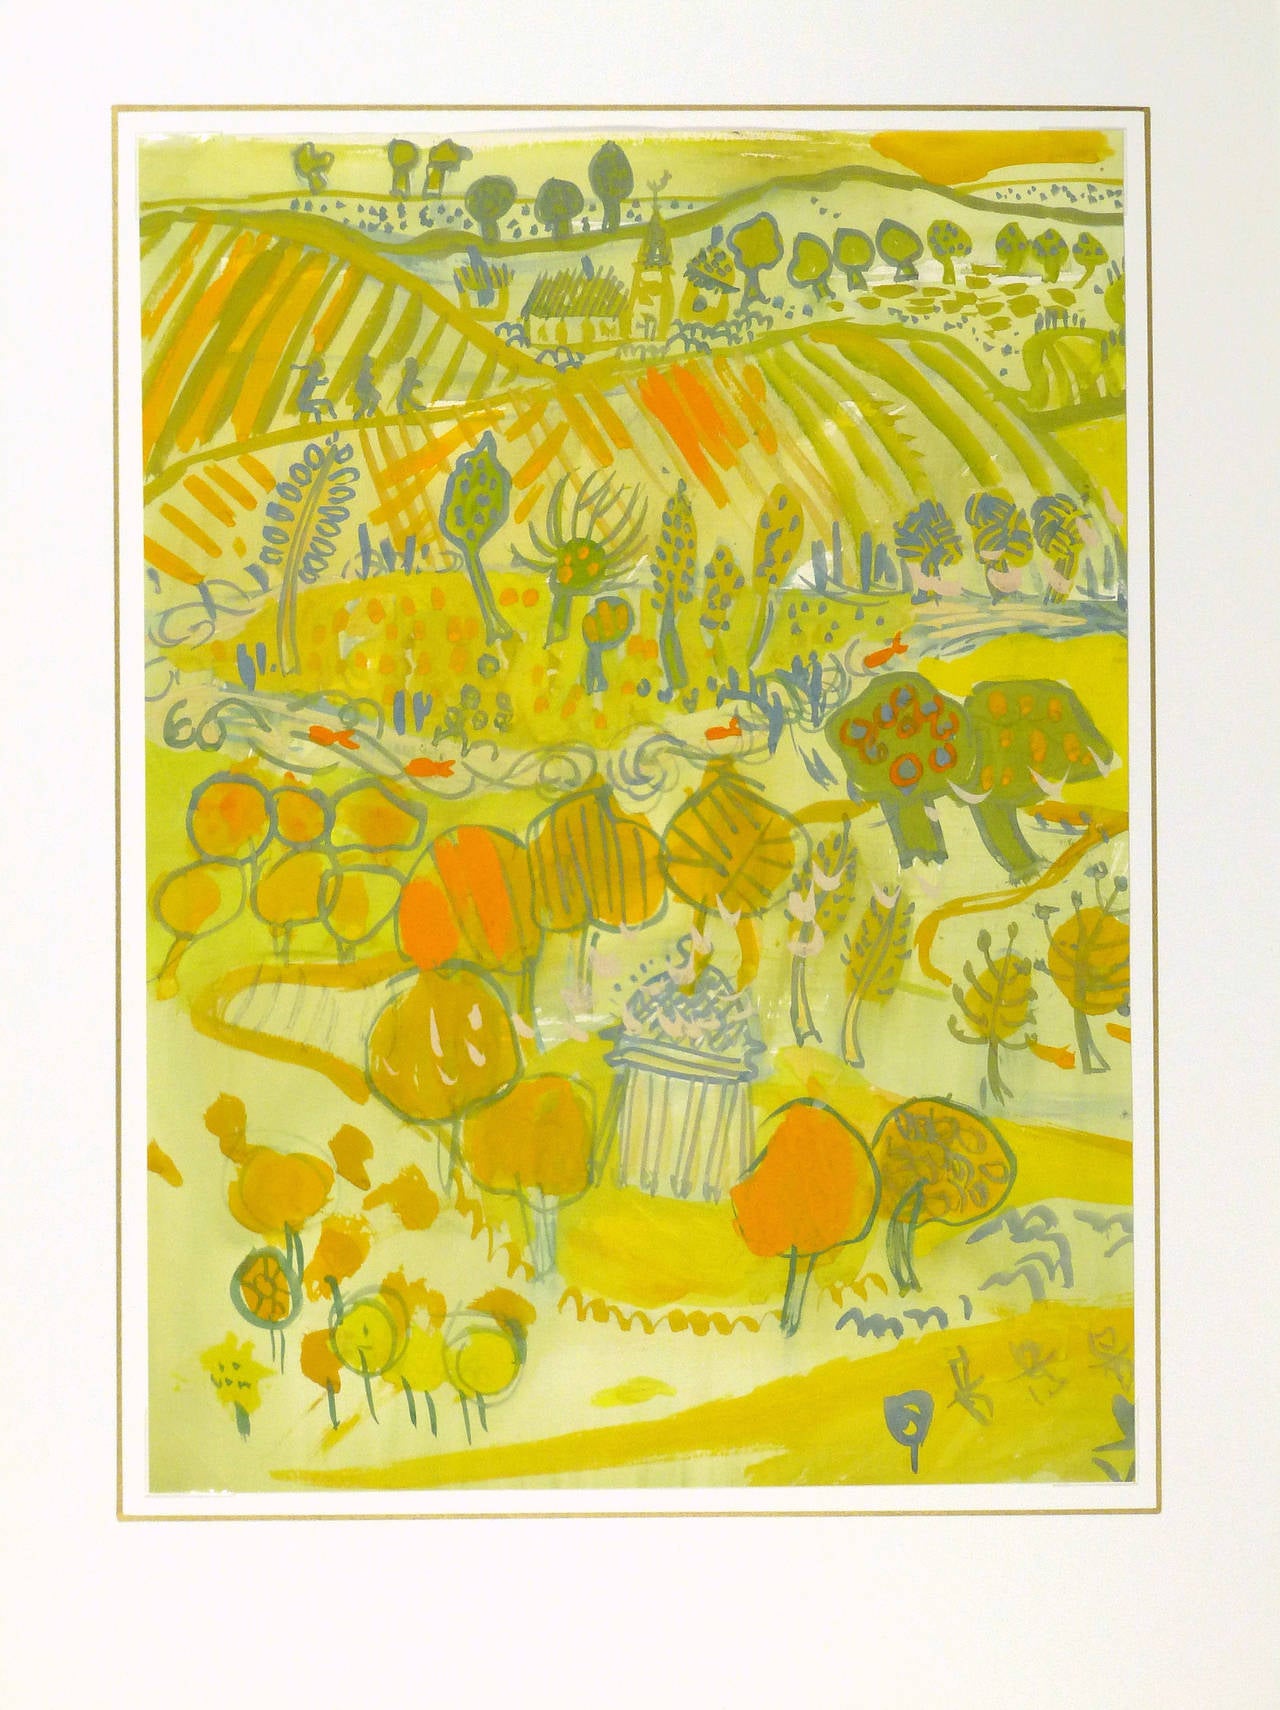 Energetic gouache landscape of a rural setting in bright warm hues by French artist André L'Archevêque, circa 1950. Unsigned. 

Original one-of-a-kind artwork on paper displayed on a white mat with a gold border. Mat fits a standard-size frame.